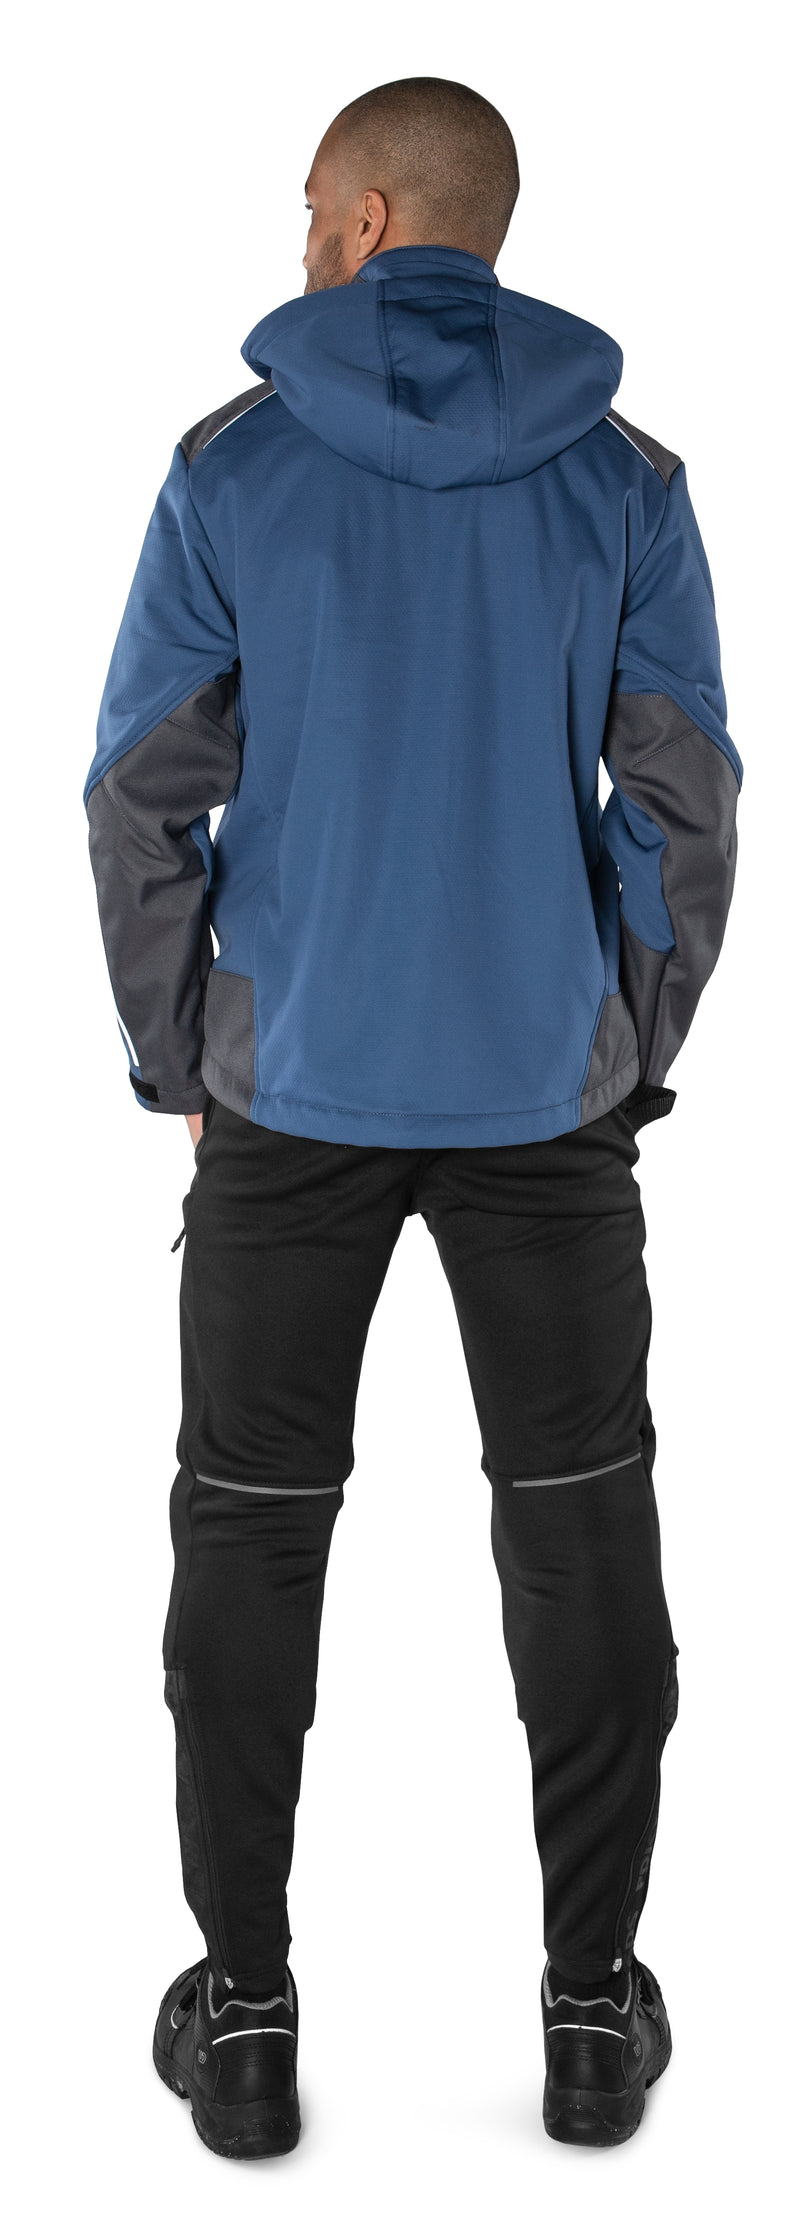 Load image into Gallery viewer, Jacket FRISTADS SOFTSHELL WINTER JACKET 4060 CFJ
